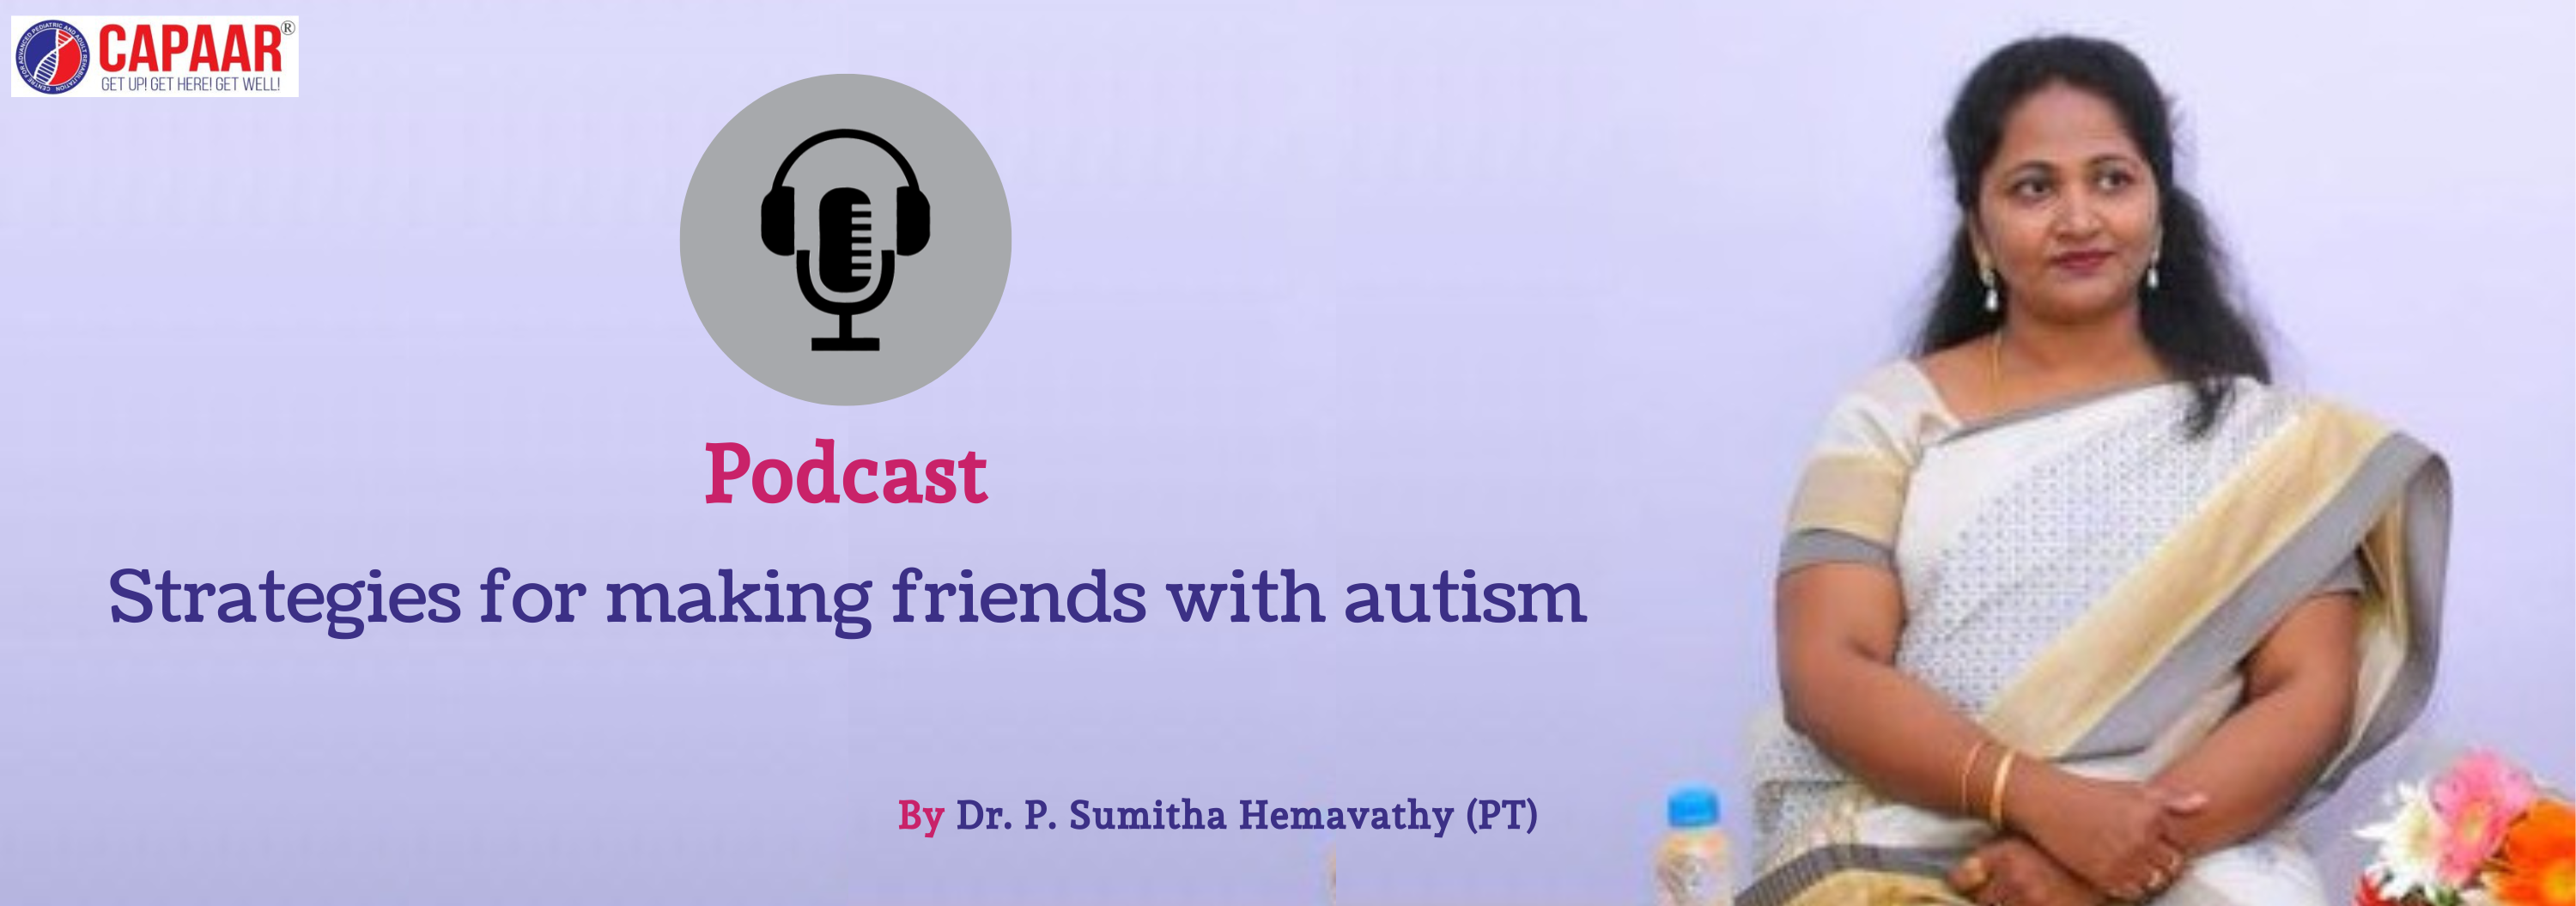 Podcast On Strategies for making friends with autism - CAPAAR